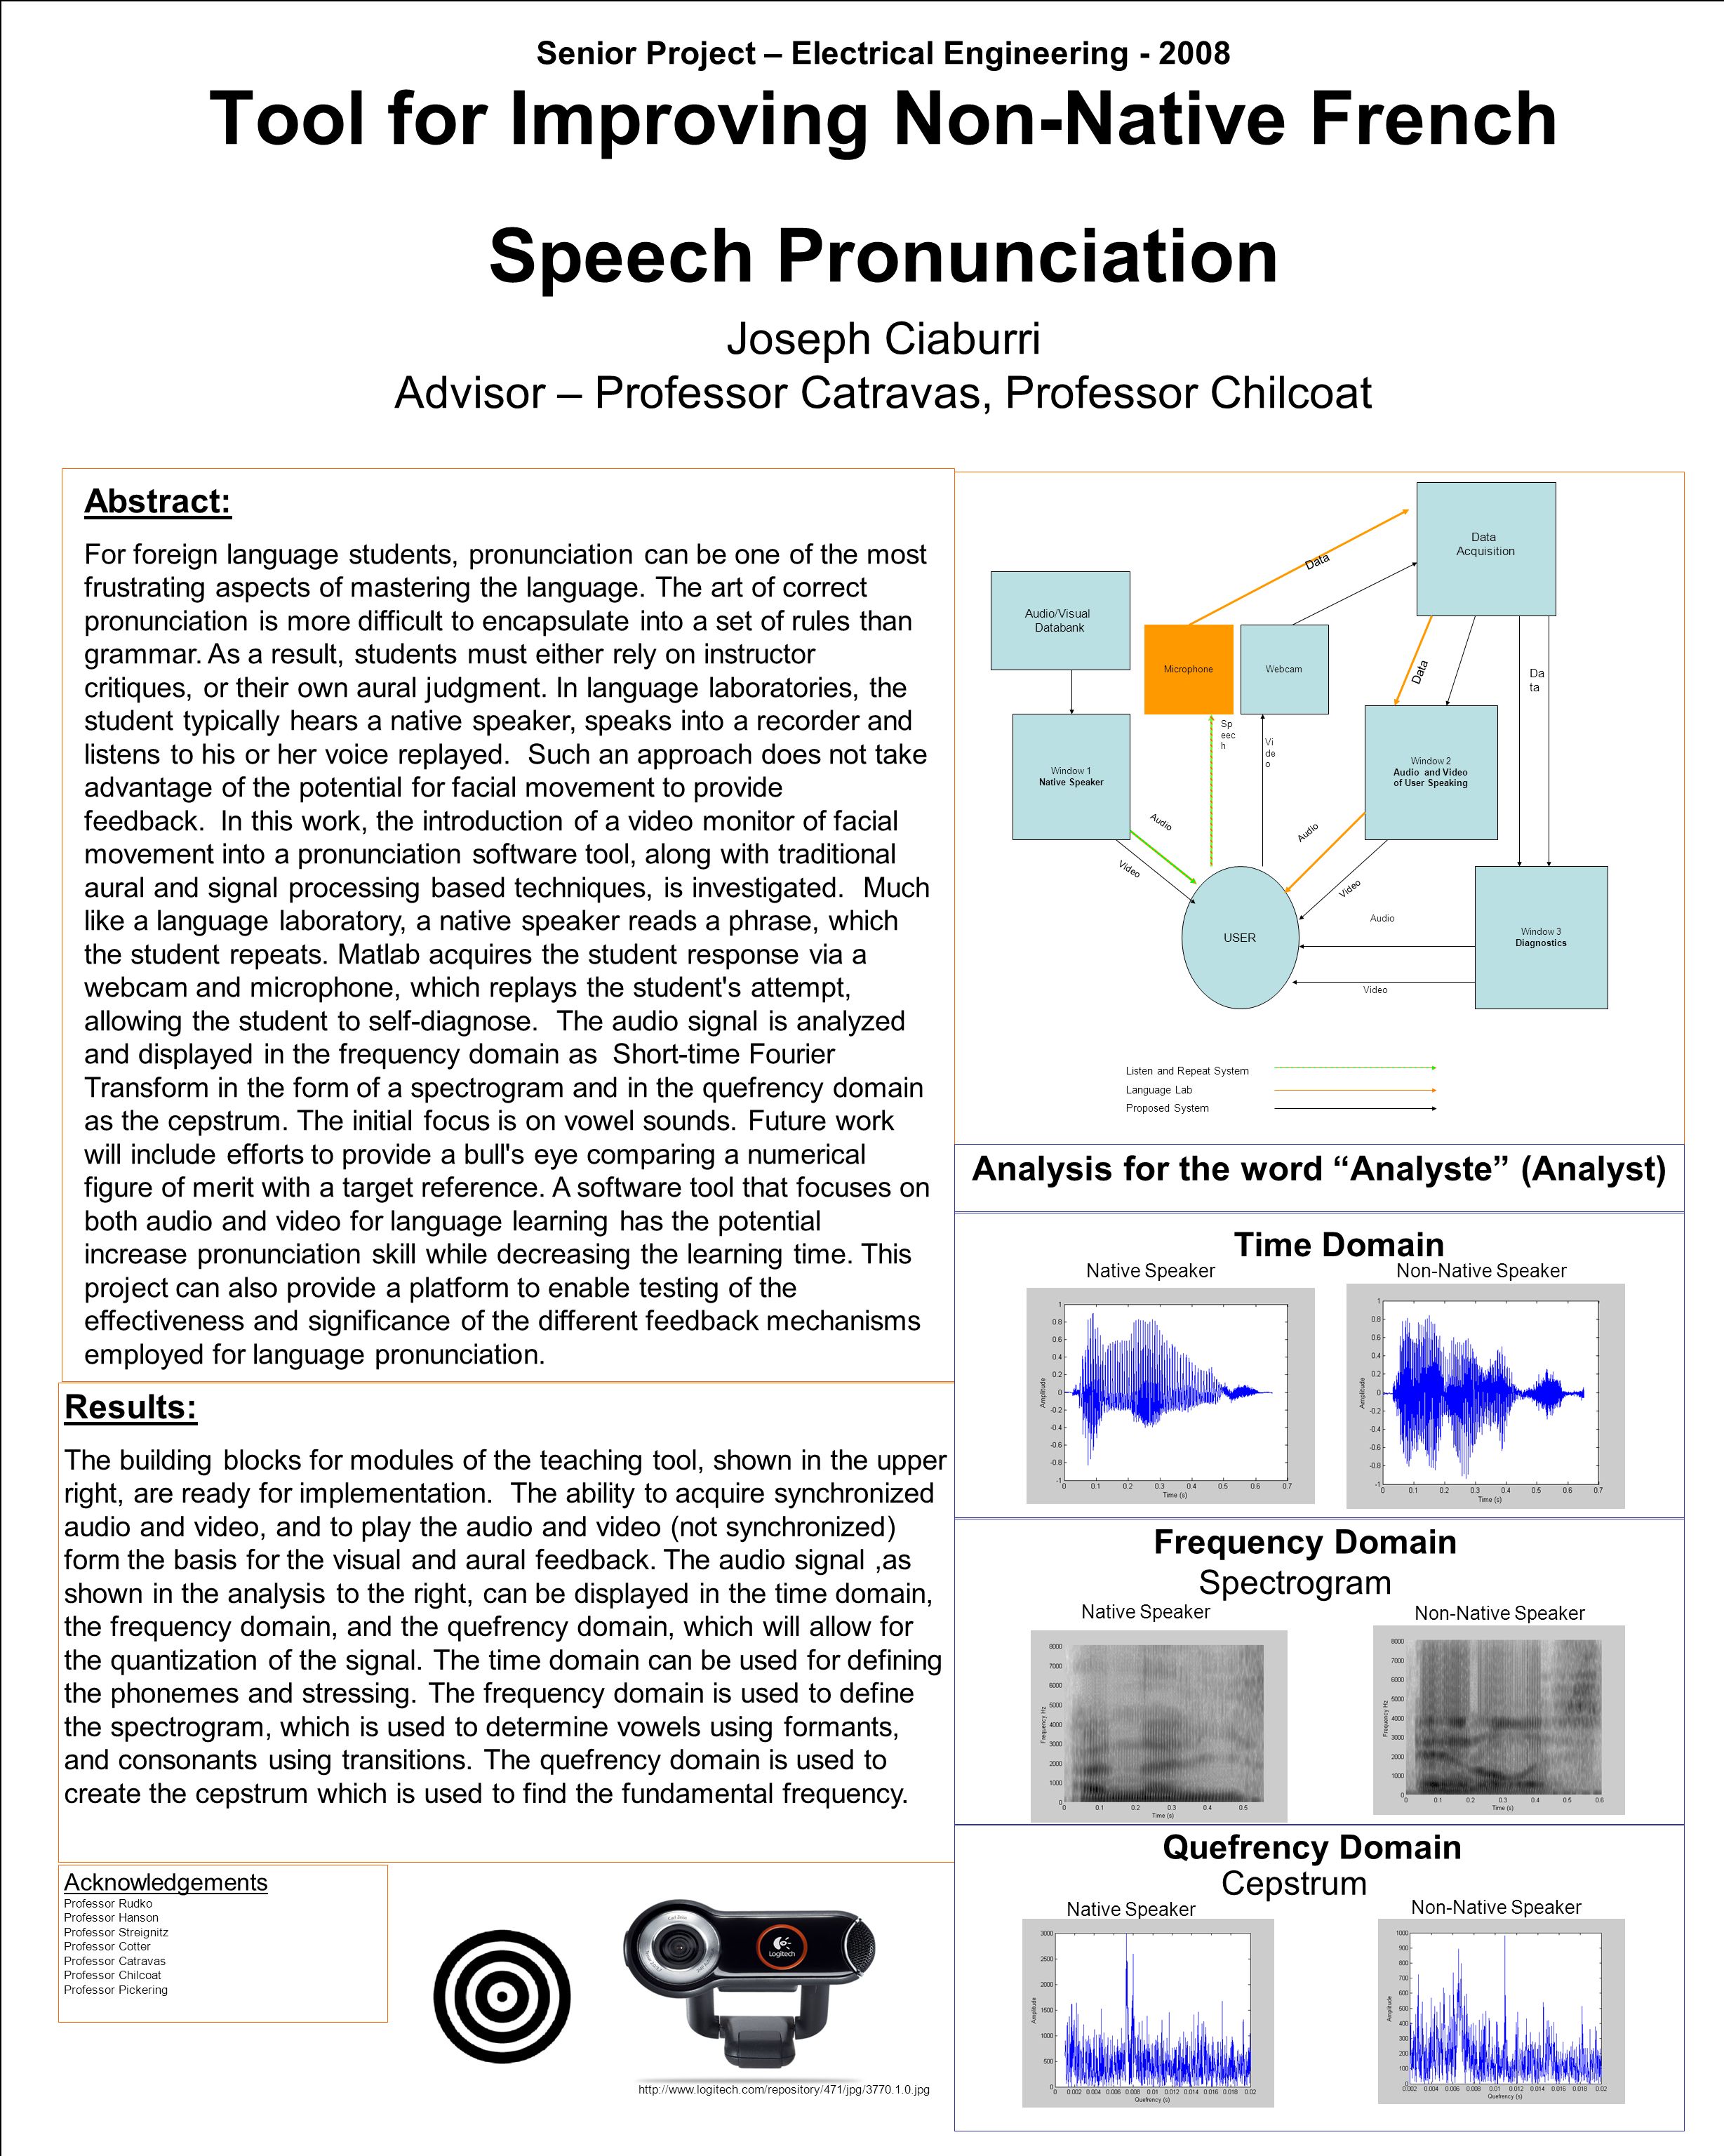 Senior Project – Electrical Engineering Tool for Improving Non-Native French Speech Pronunciation Joseph Ciaburri Advisor – Professor Catravas, Professor Chilcoat Abstract: For foreign language students, pronunciation can be one of the most frustrating aspects of mastering the language.